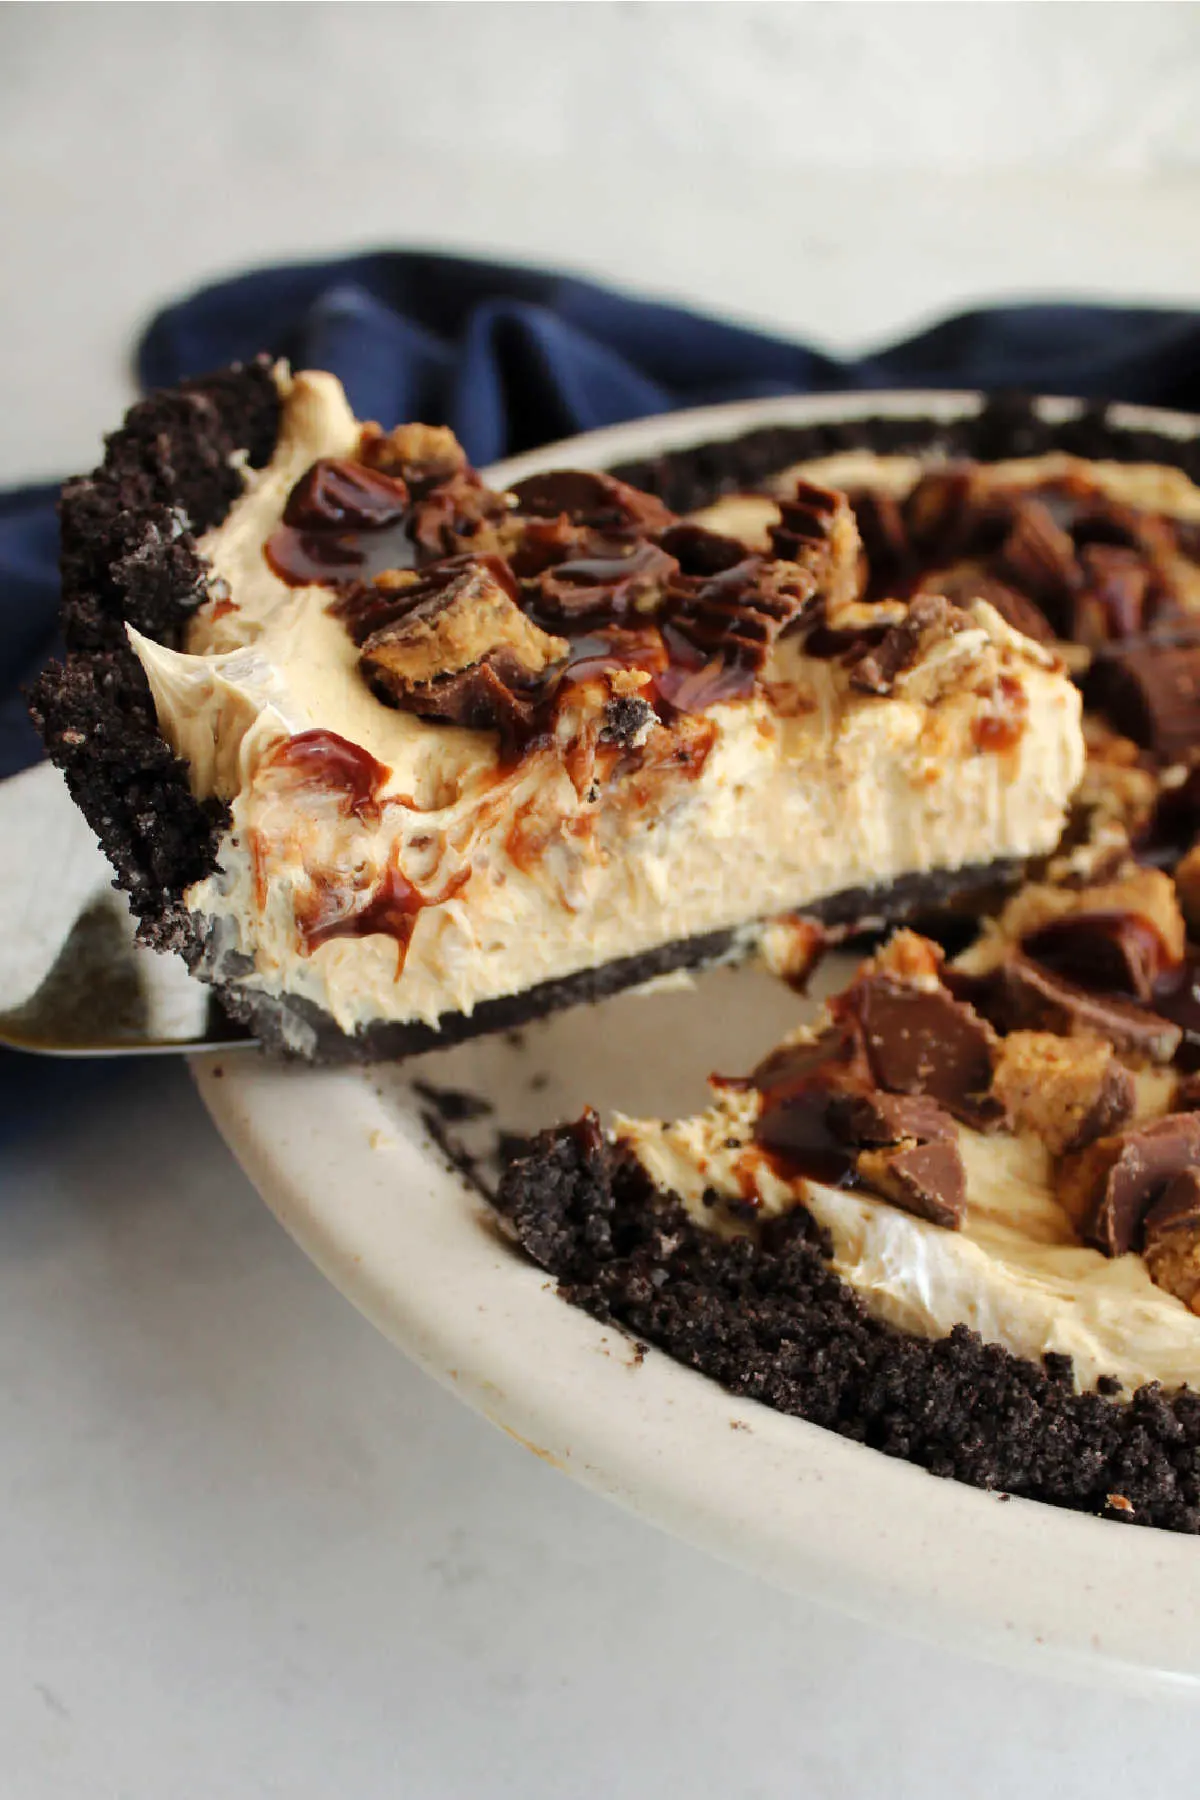 Lifting slice of peanut butter pie out of the pan showing Oreo crust, creamy peanut butter filling and candies and fudge on top.